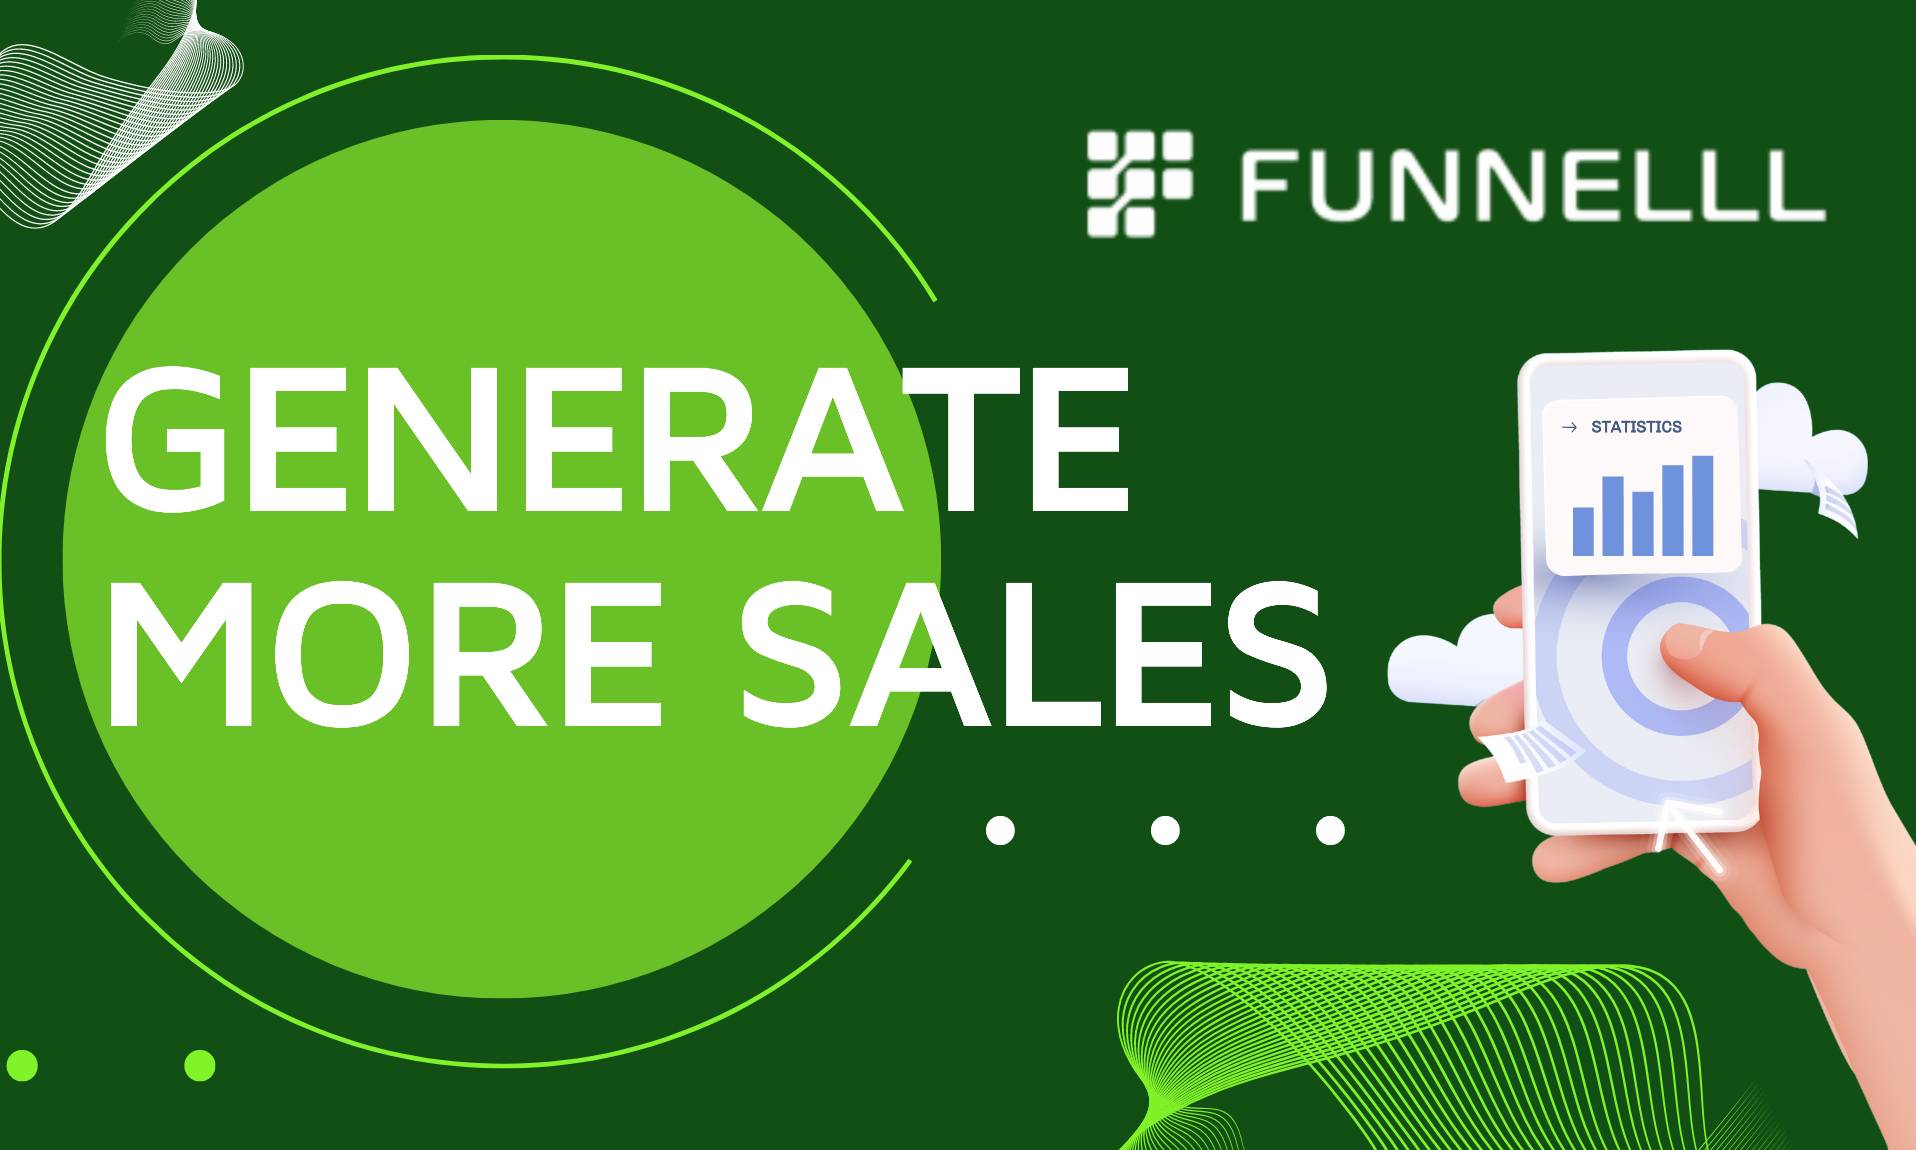 Funnelll - Generate more sales by leveraging you marketing data